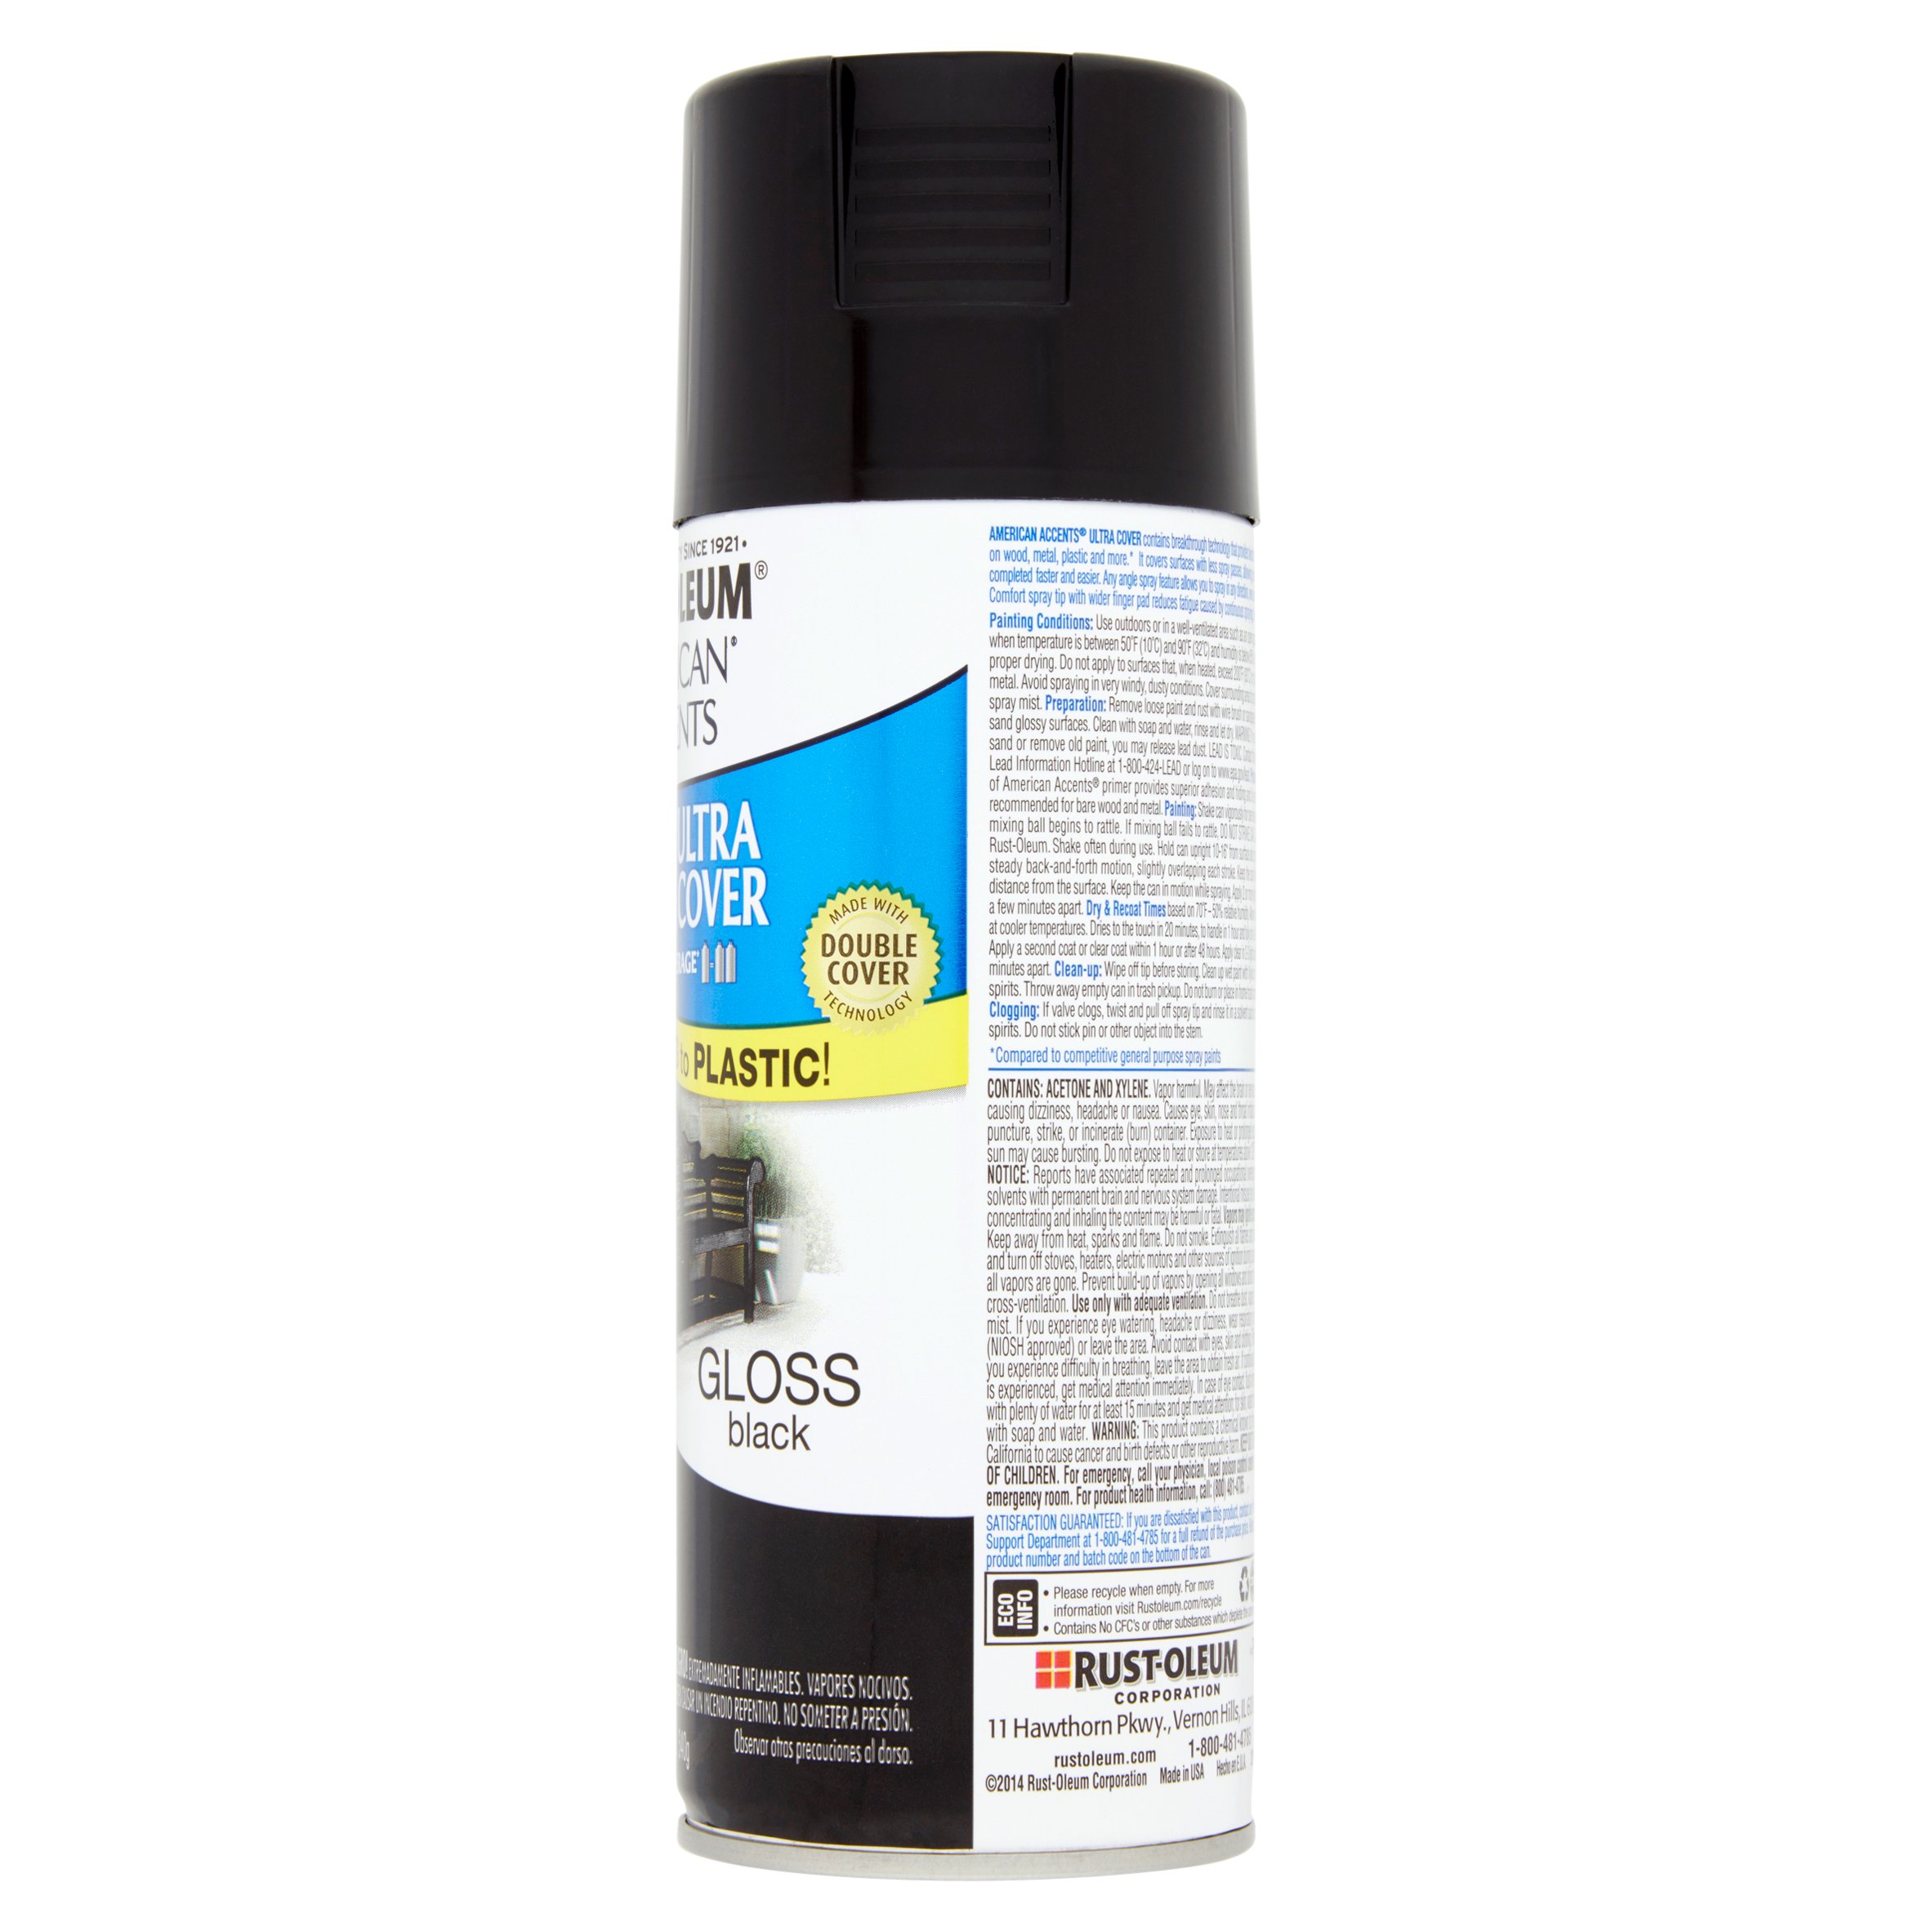 Rust-Oleum American Accents Ultra Cover 2X Gloss Black Spray Paint and Primer in 1, 12 oz - image 2 of 5